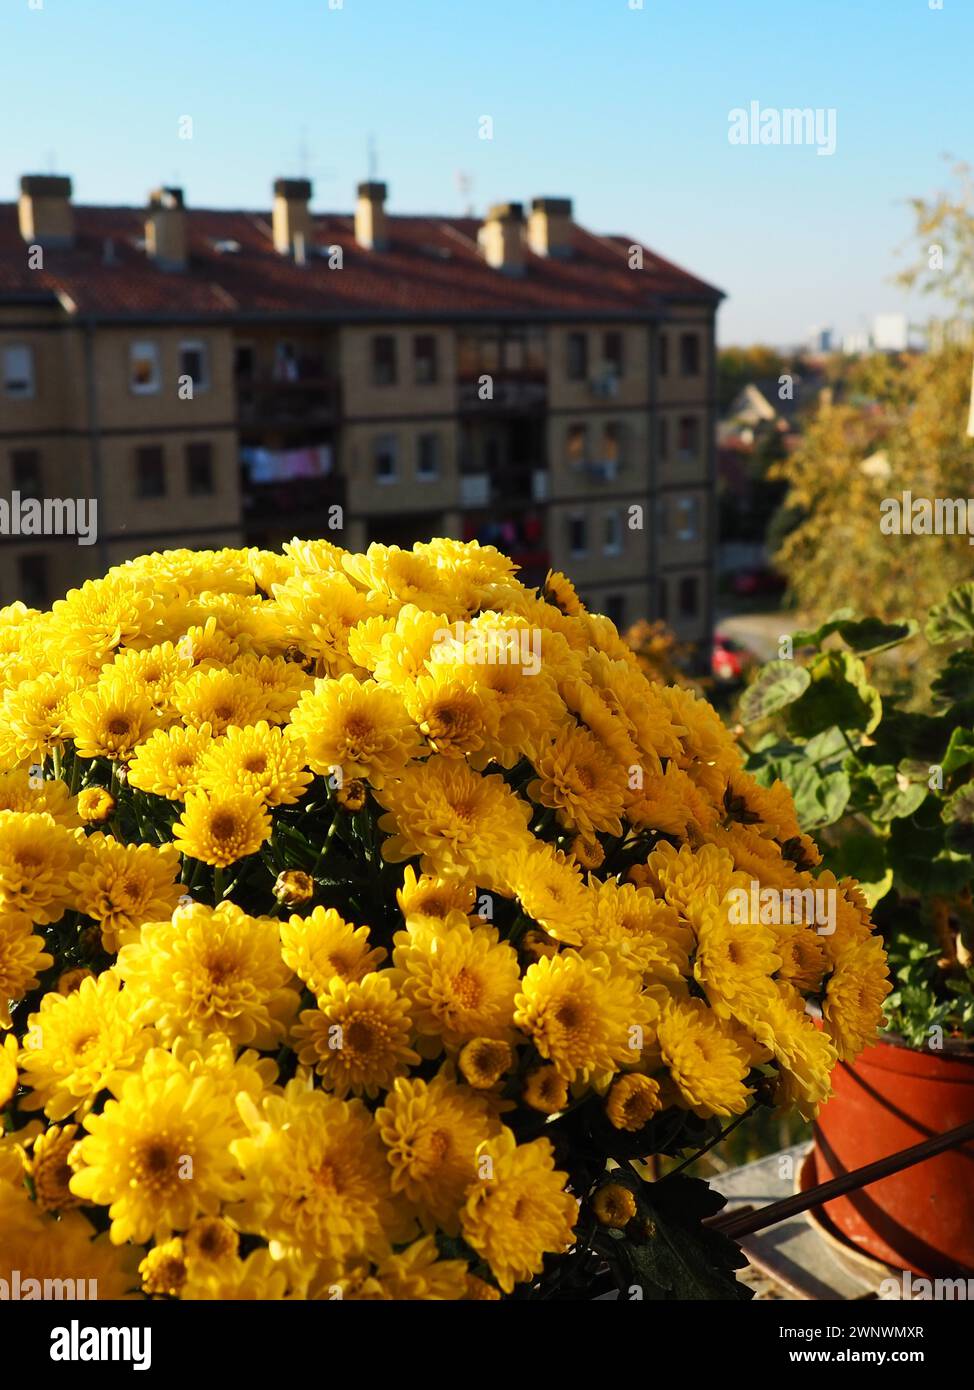 Yellow chrysanthemums, pots of geraniums and celery on the windowsill outside the window. Growing flowers on the balcony and windowsill. Indoor Stock Photo